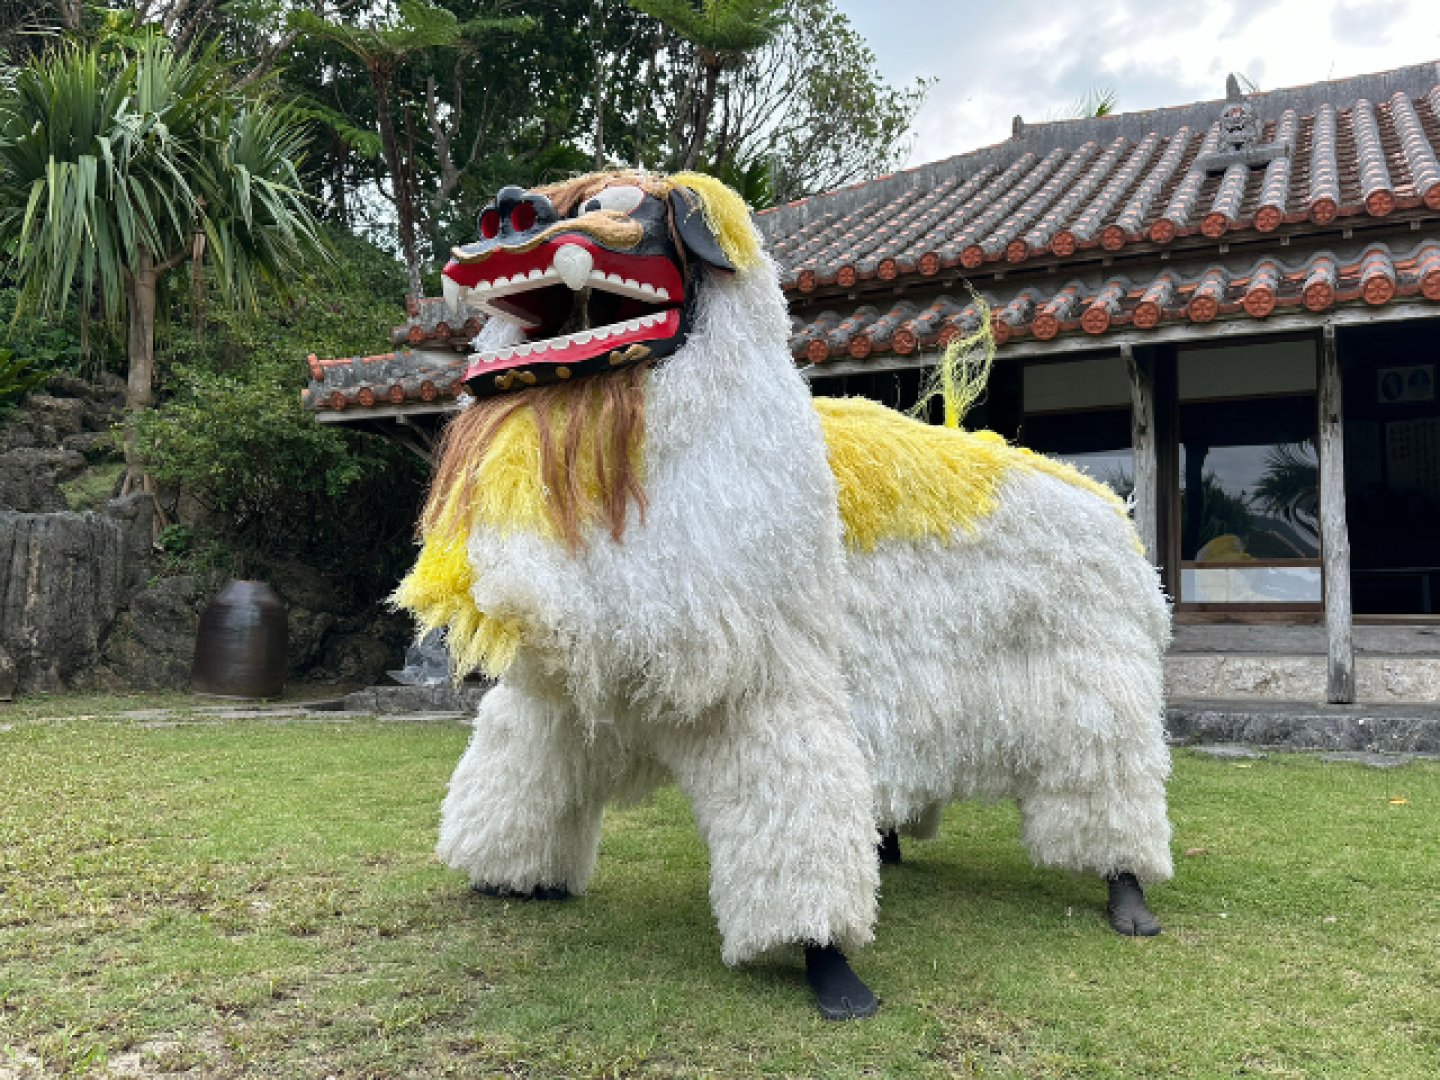 A food and entertainment experience plan (Lion dance) that lets you feel like the aristocrats of the Ryukyu era